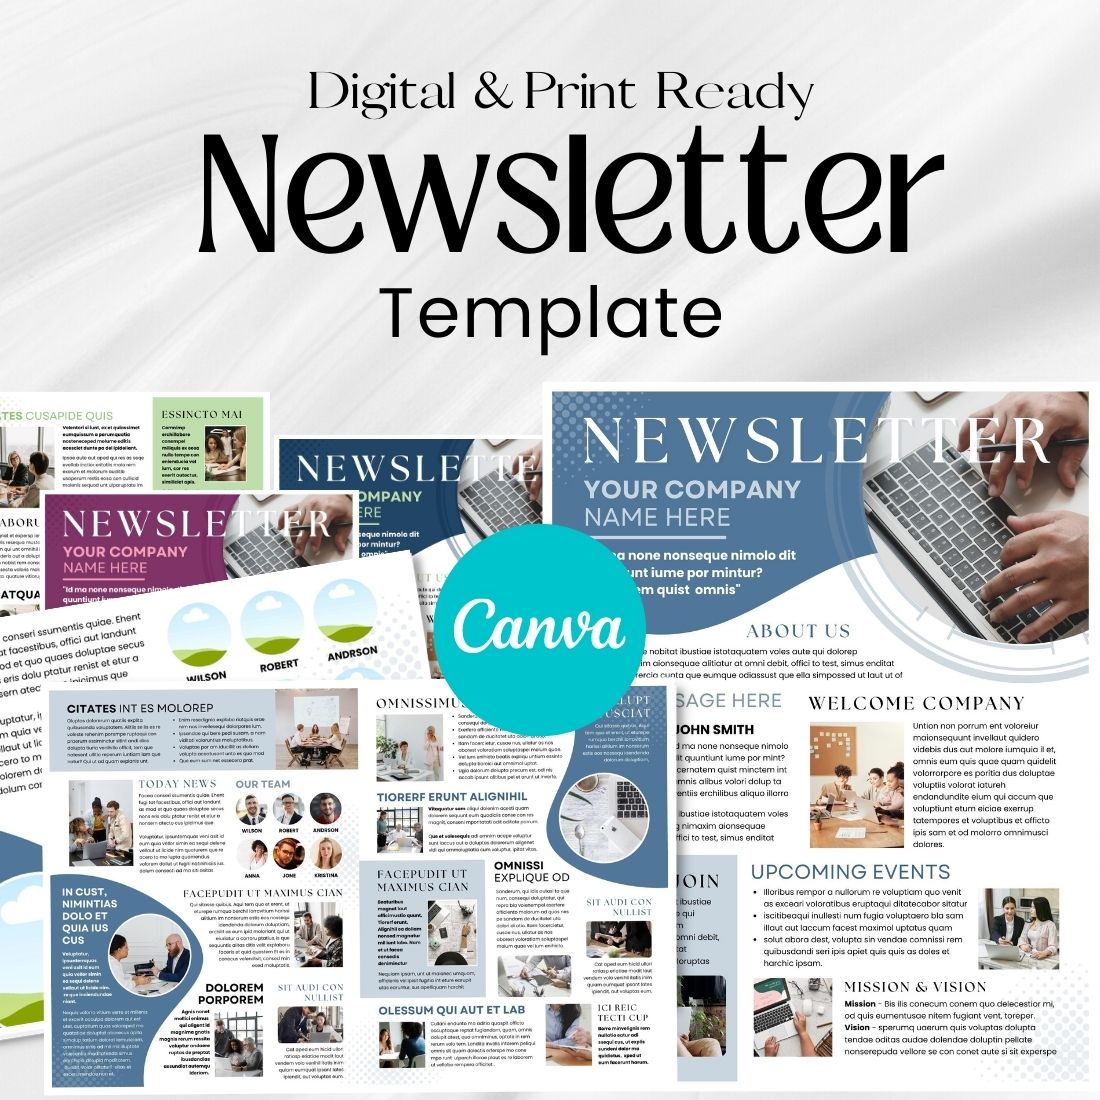 Download Canva Newsletter Template, Digital and Printable main cover.